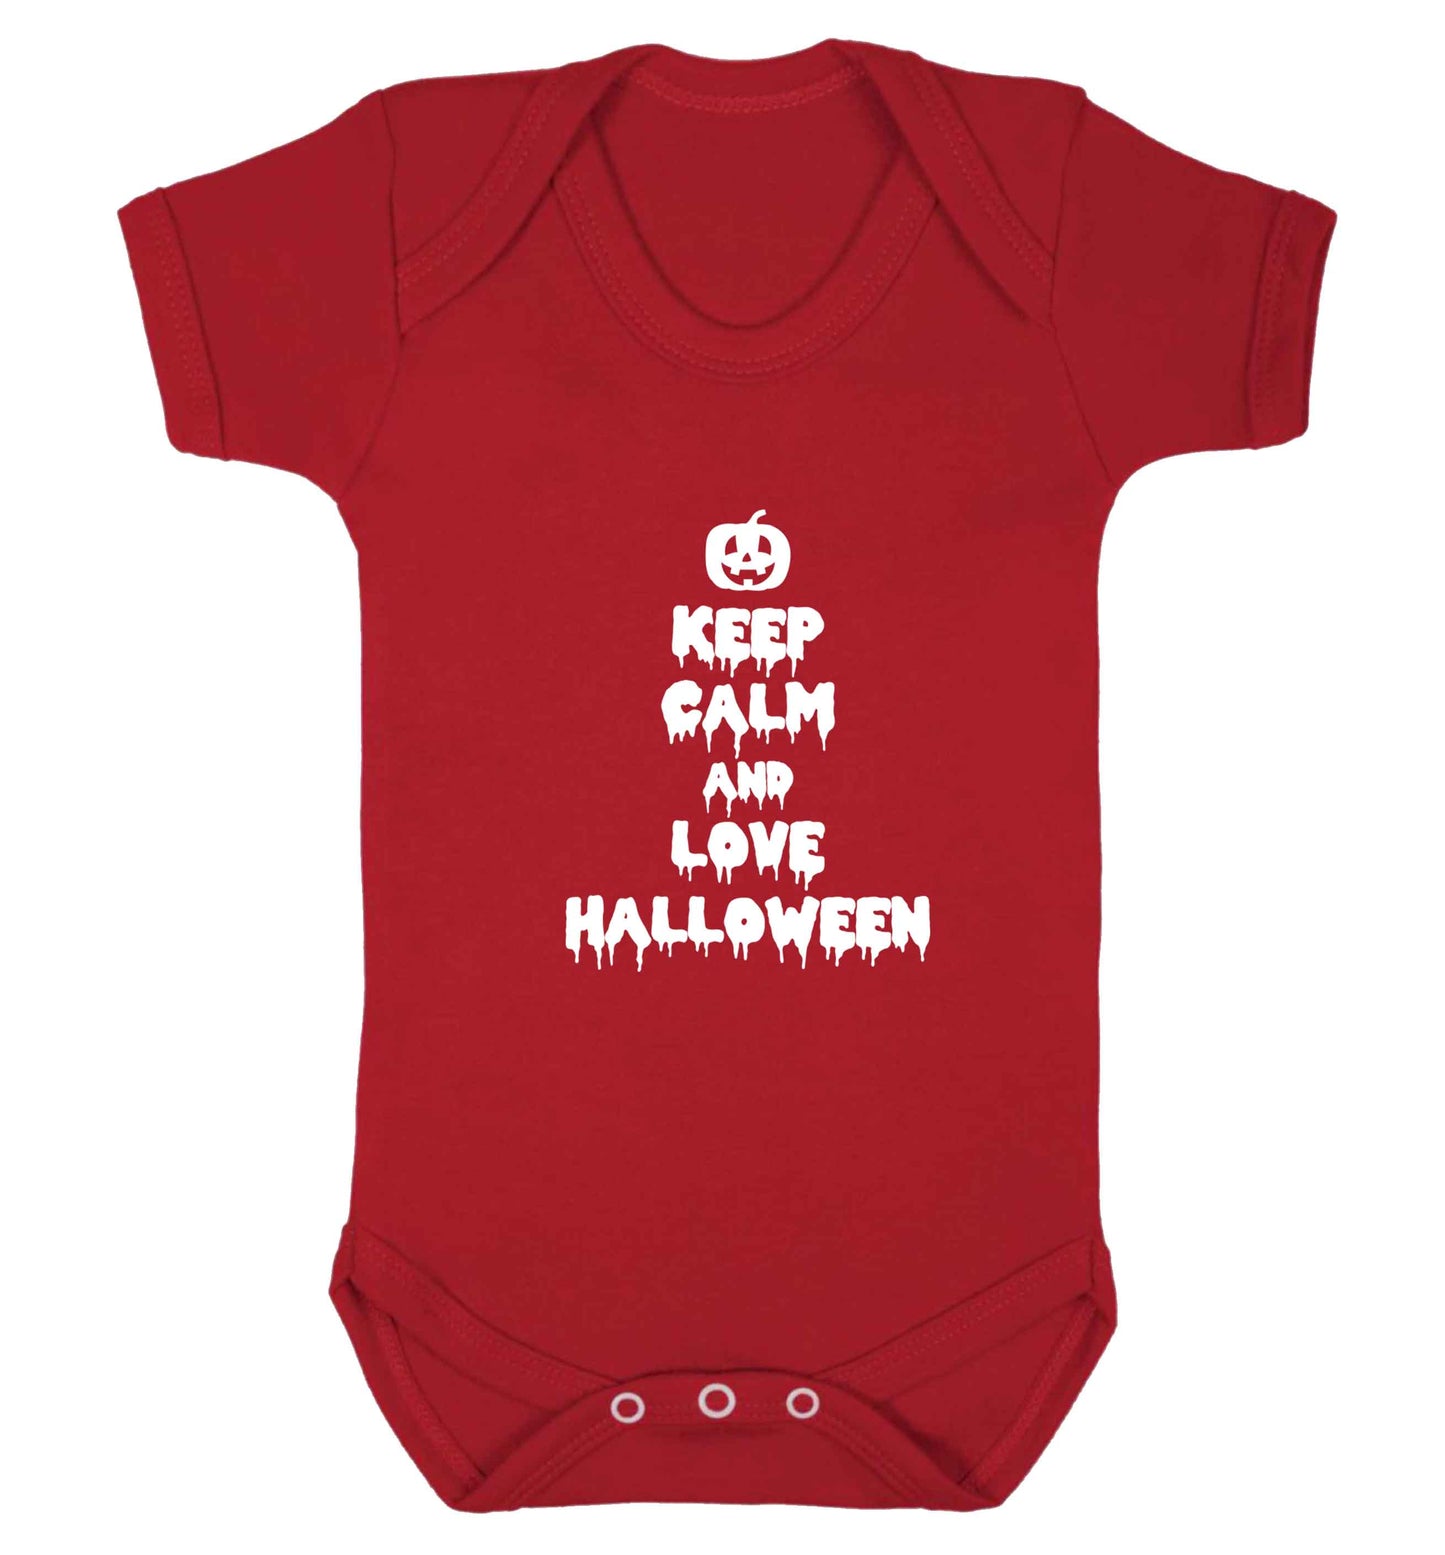 Keep calm and love halloween baby vest red 18-24 months